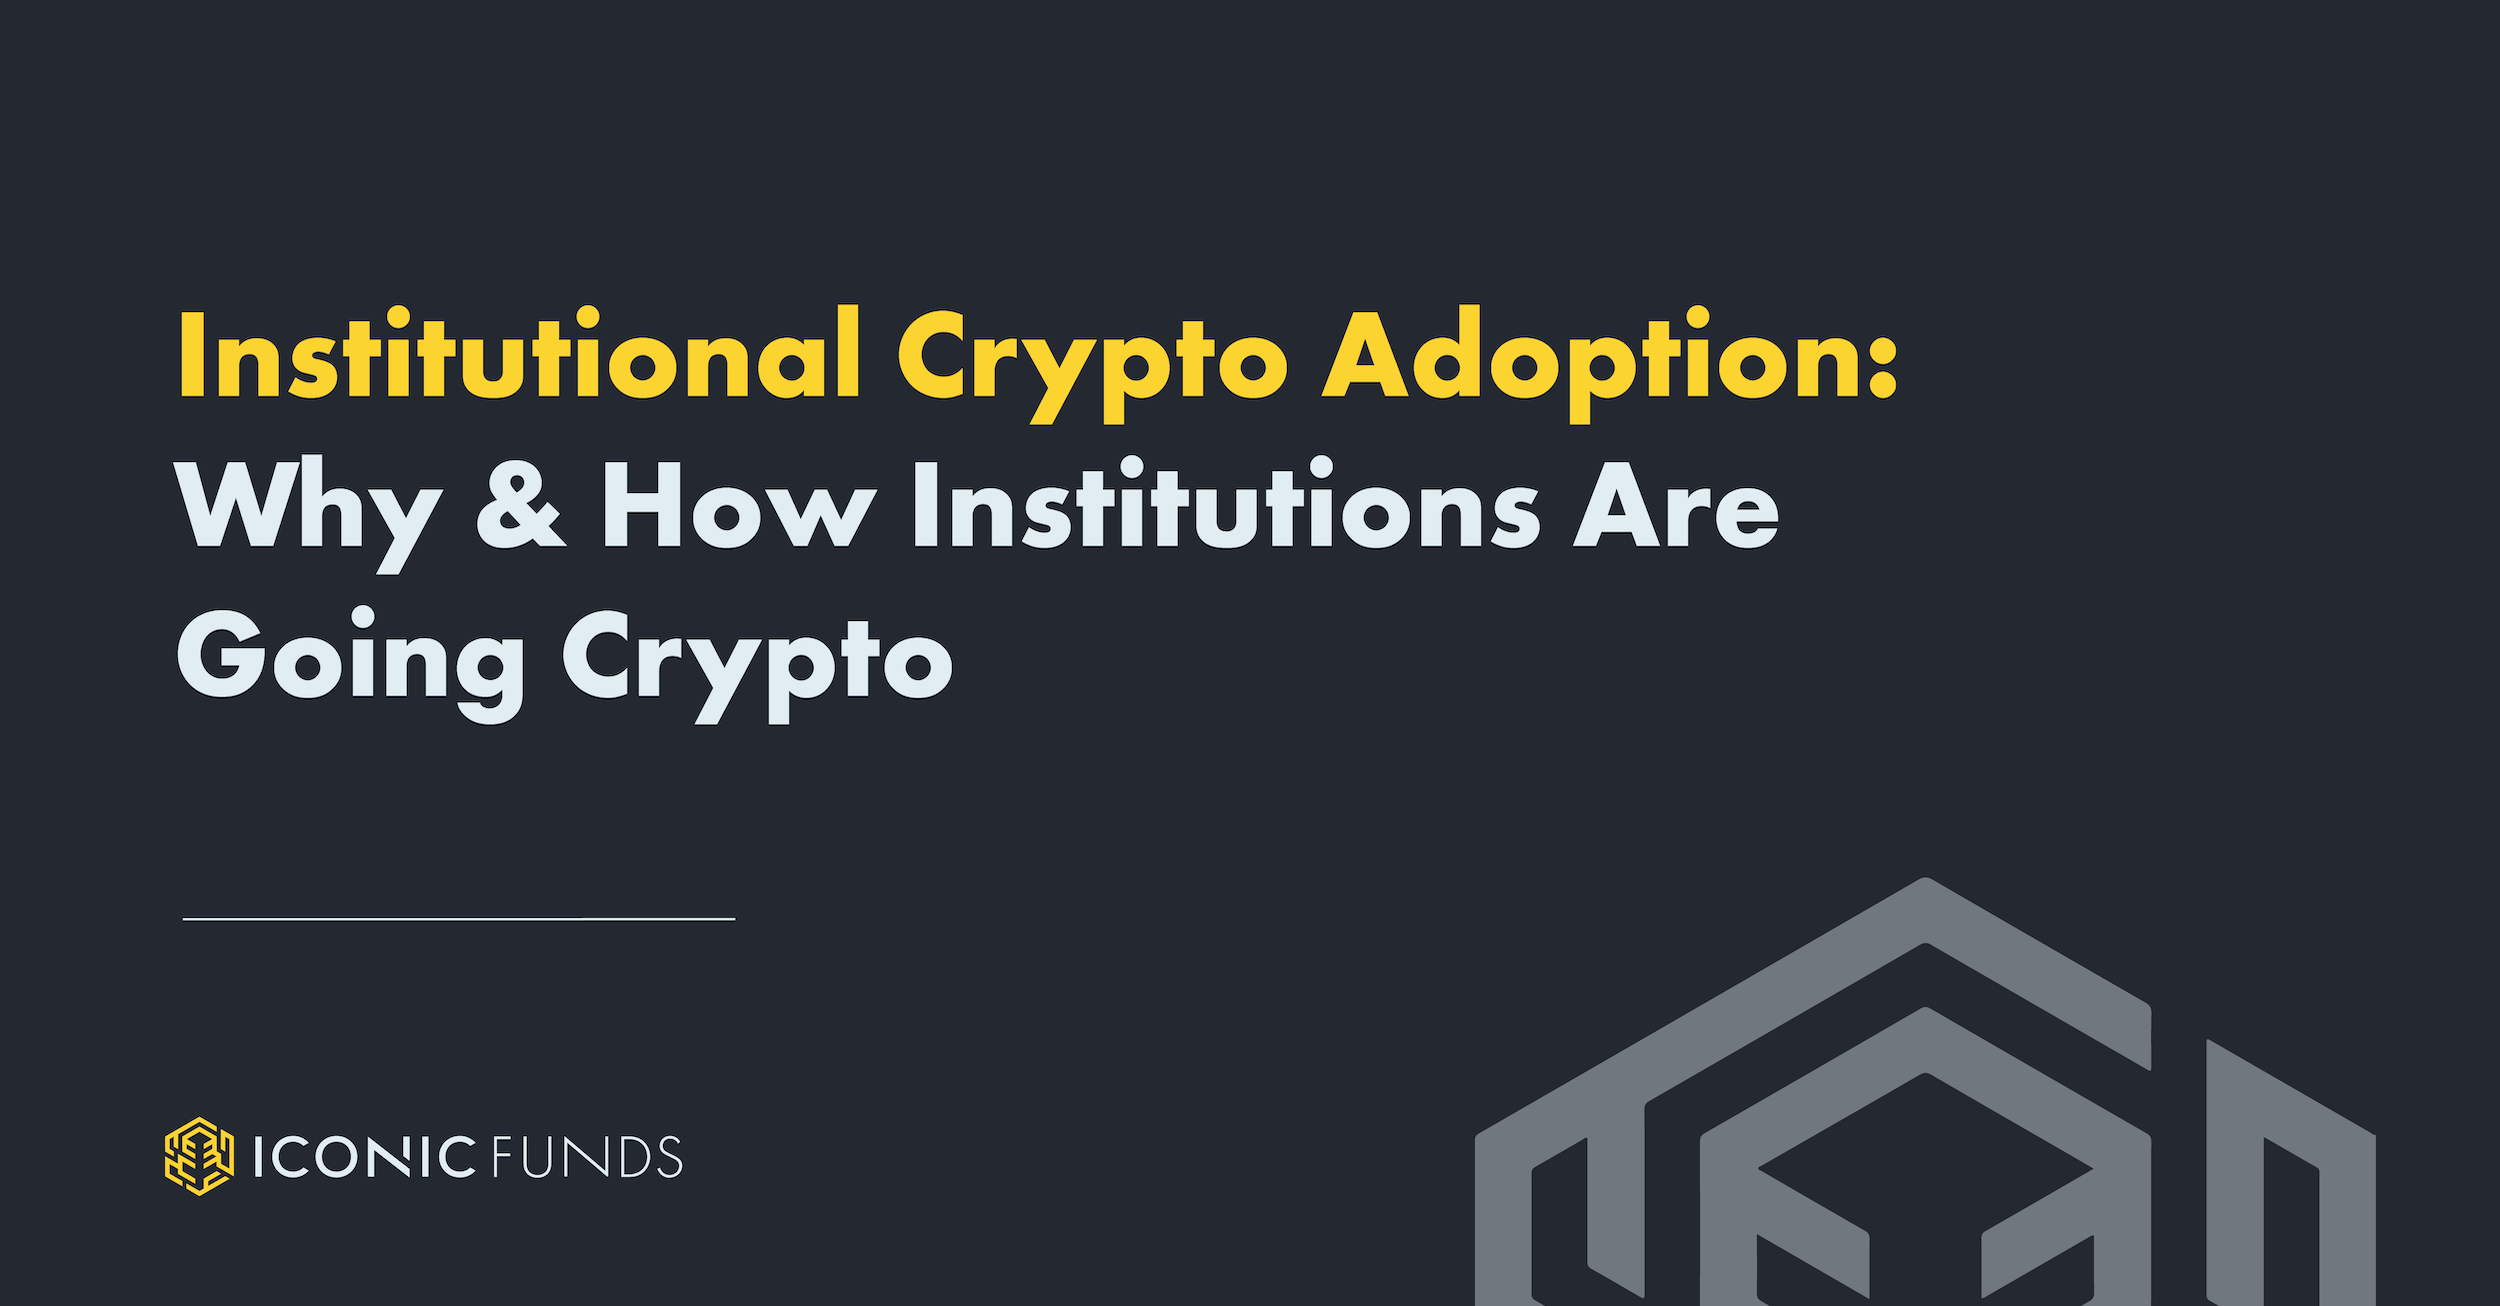 Institutional Crypto Adoption: Why & How Institutions Are Going Crypto